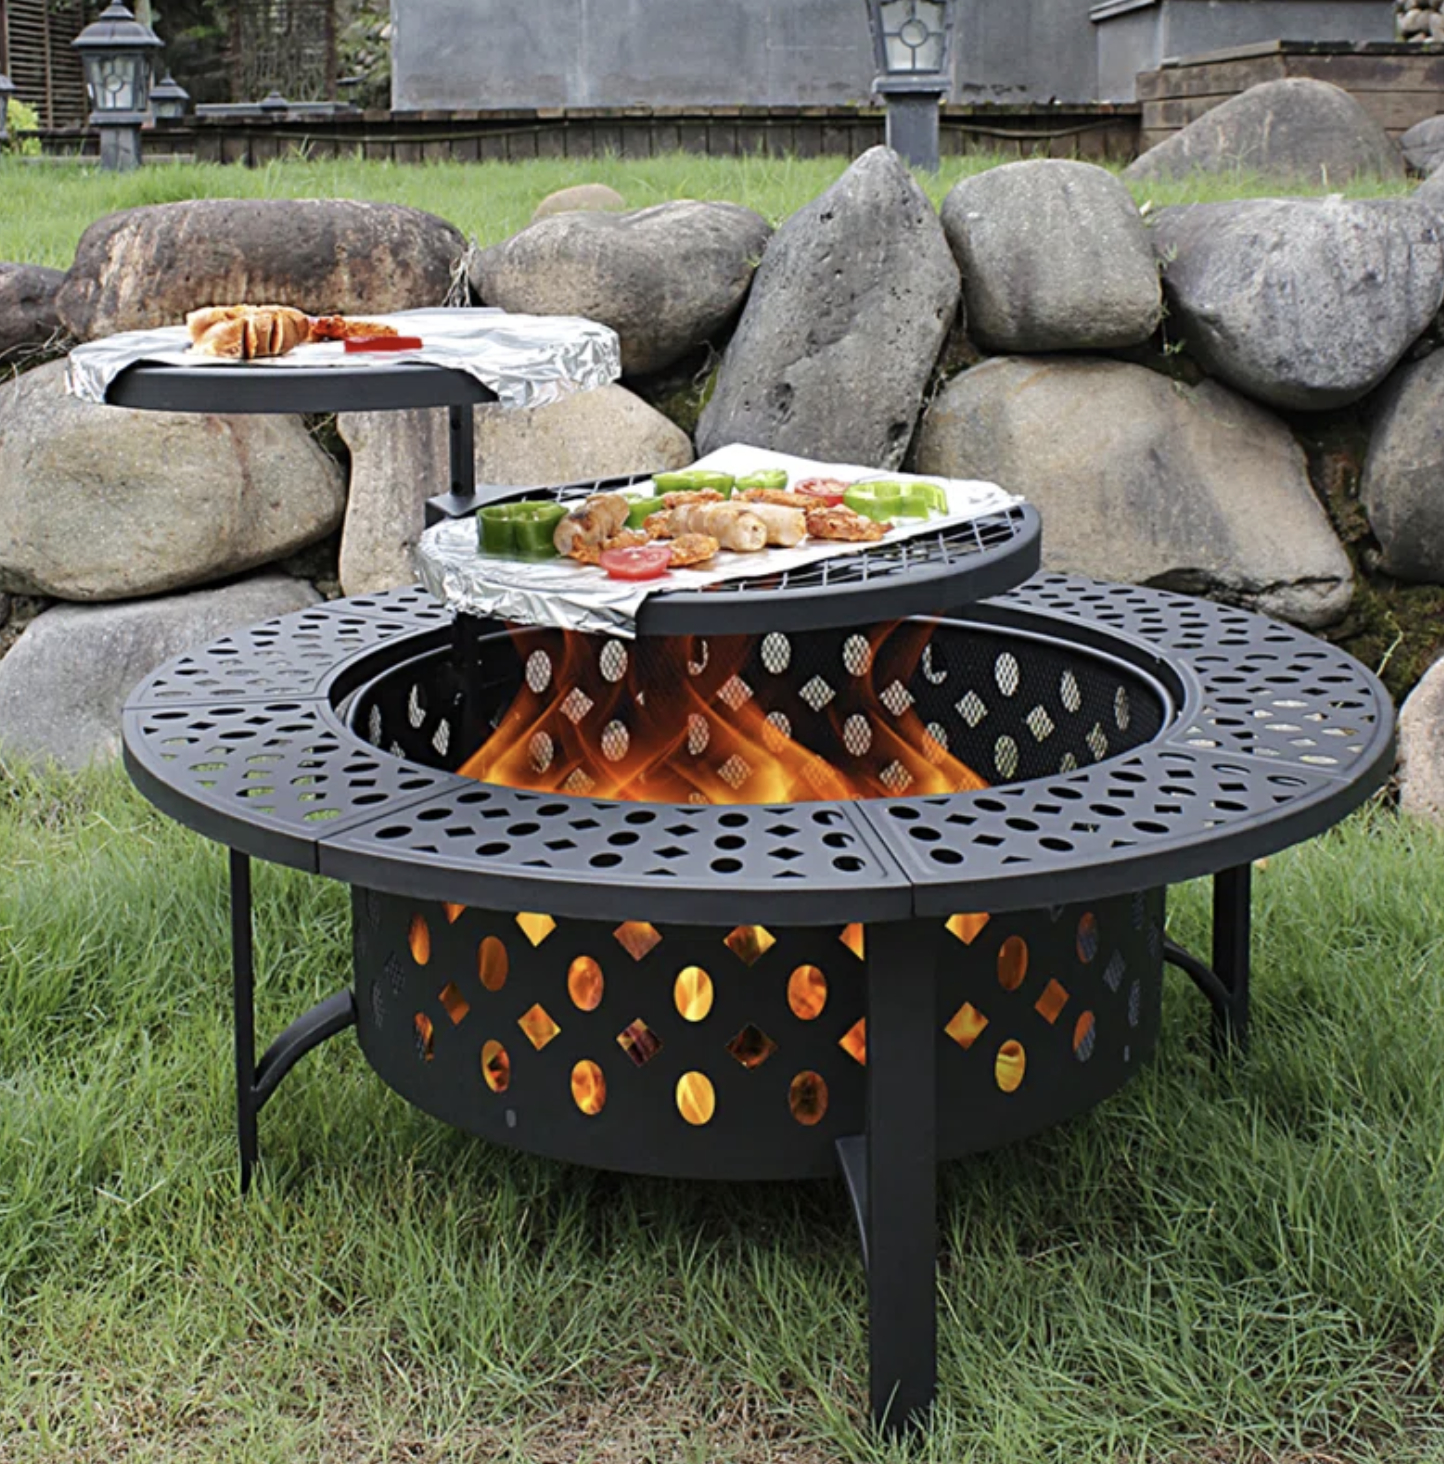 The open-design fire pit with a grill top cooking food and second grill grate resting in background